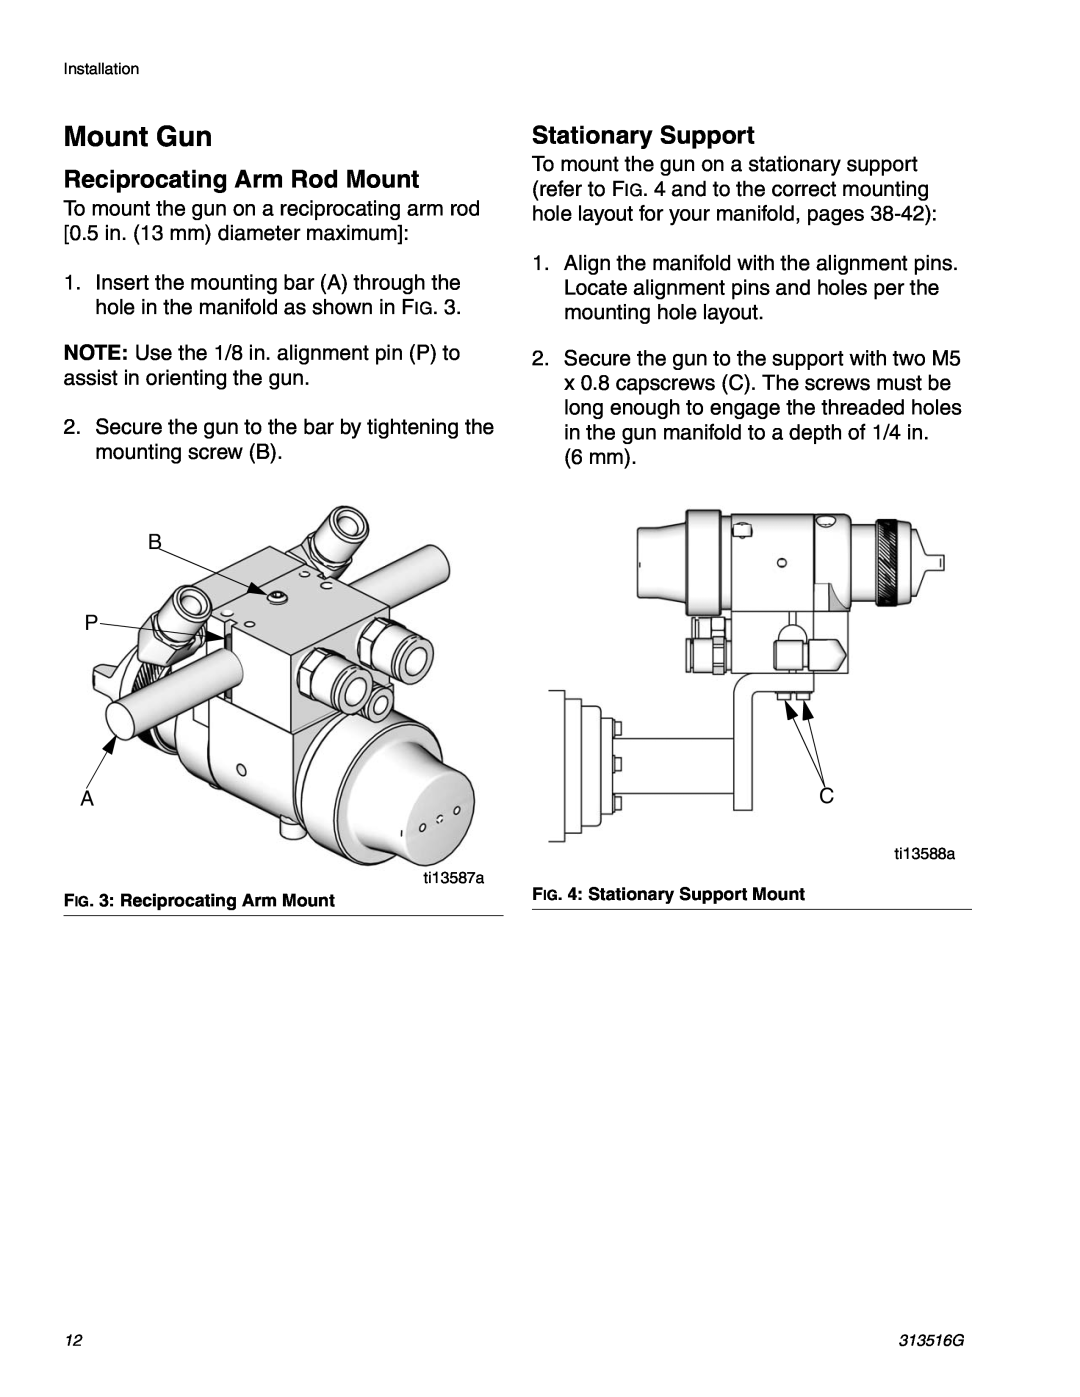 Graco ti13585a, ti13586a important safety instructions Mount Gun, Reciprocating Arm Rod Mount, Stationary Support 